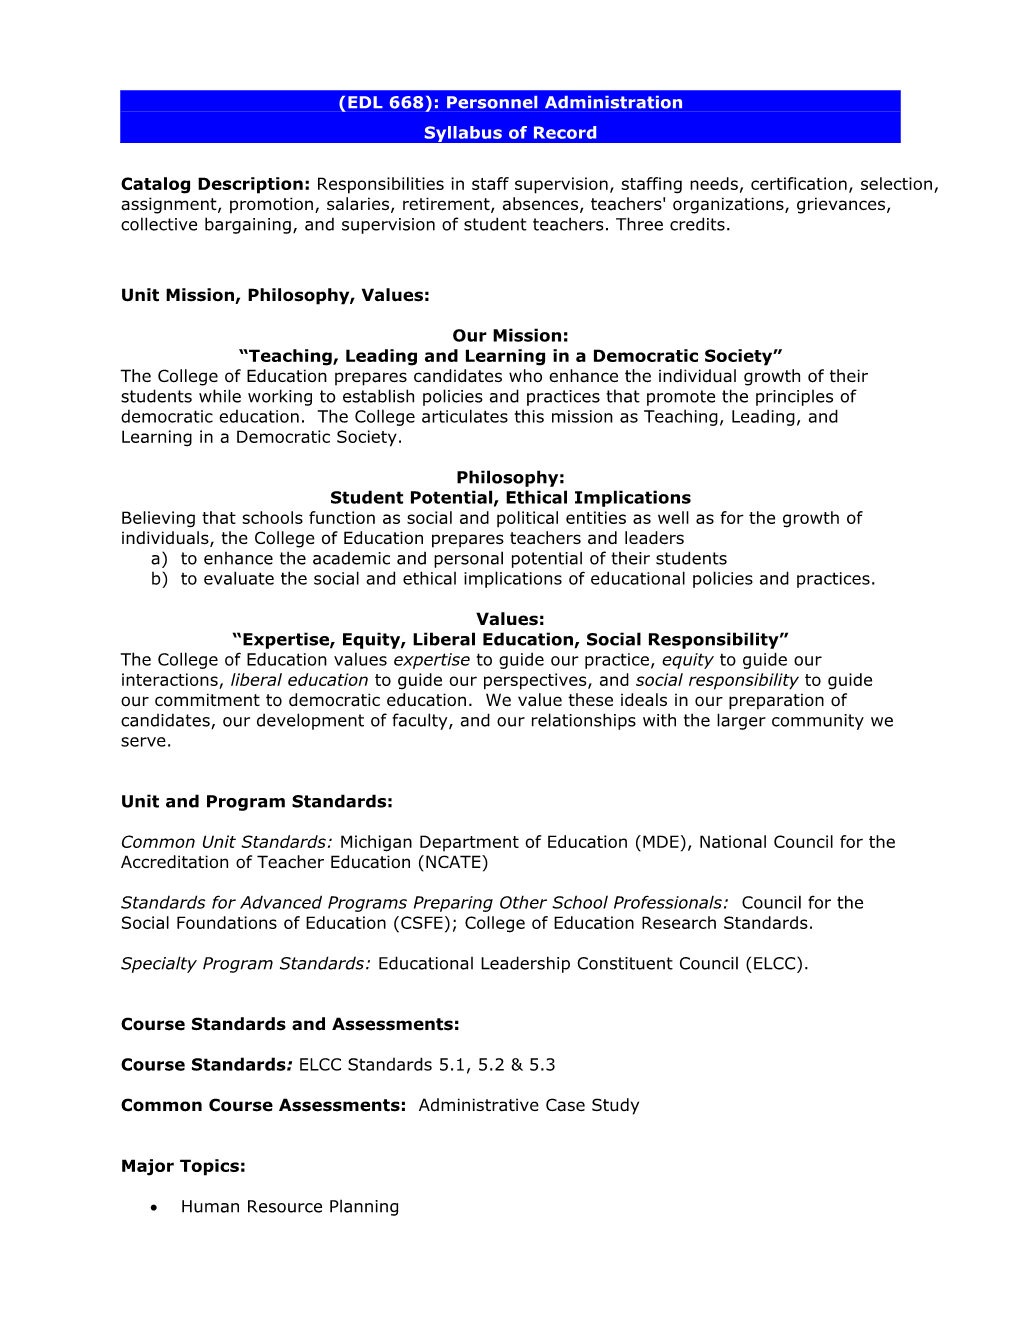 (EDG 668) Syllabus of Record: Personnel Administration